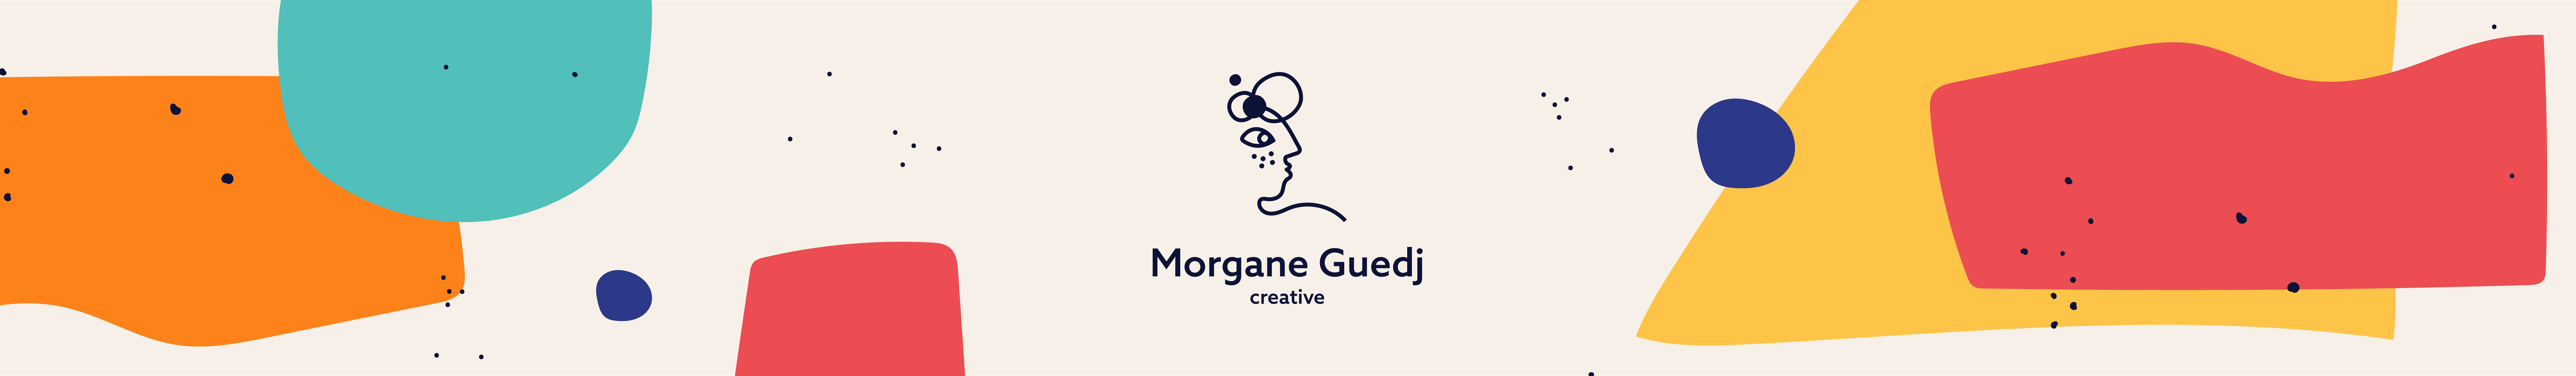 Morgane Guedj's profile banner